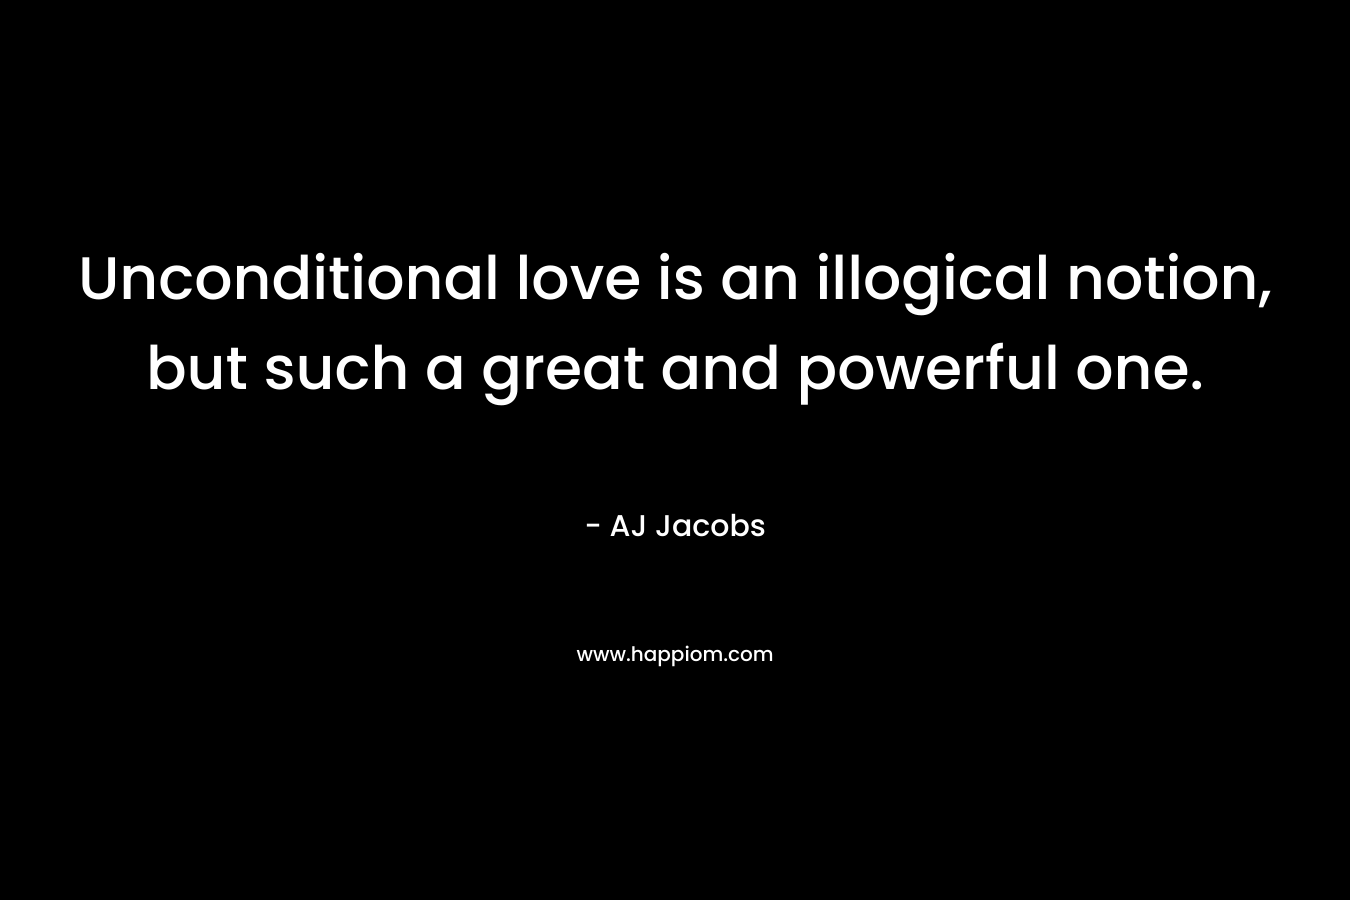 Unconditional love is an illogical notion, but such a great and powerful one.